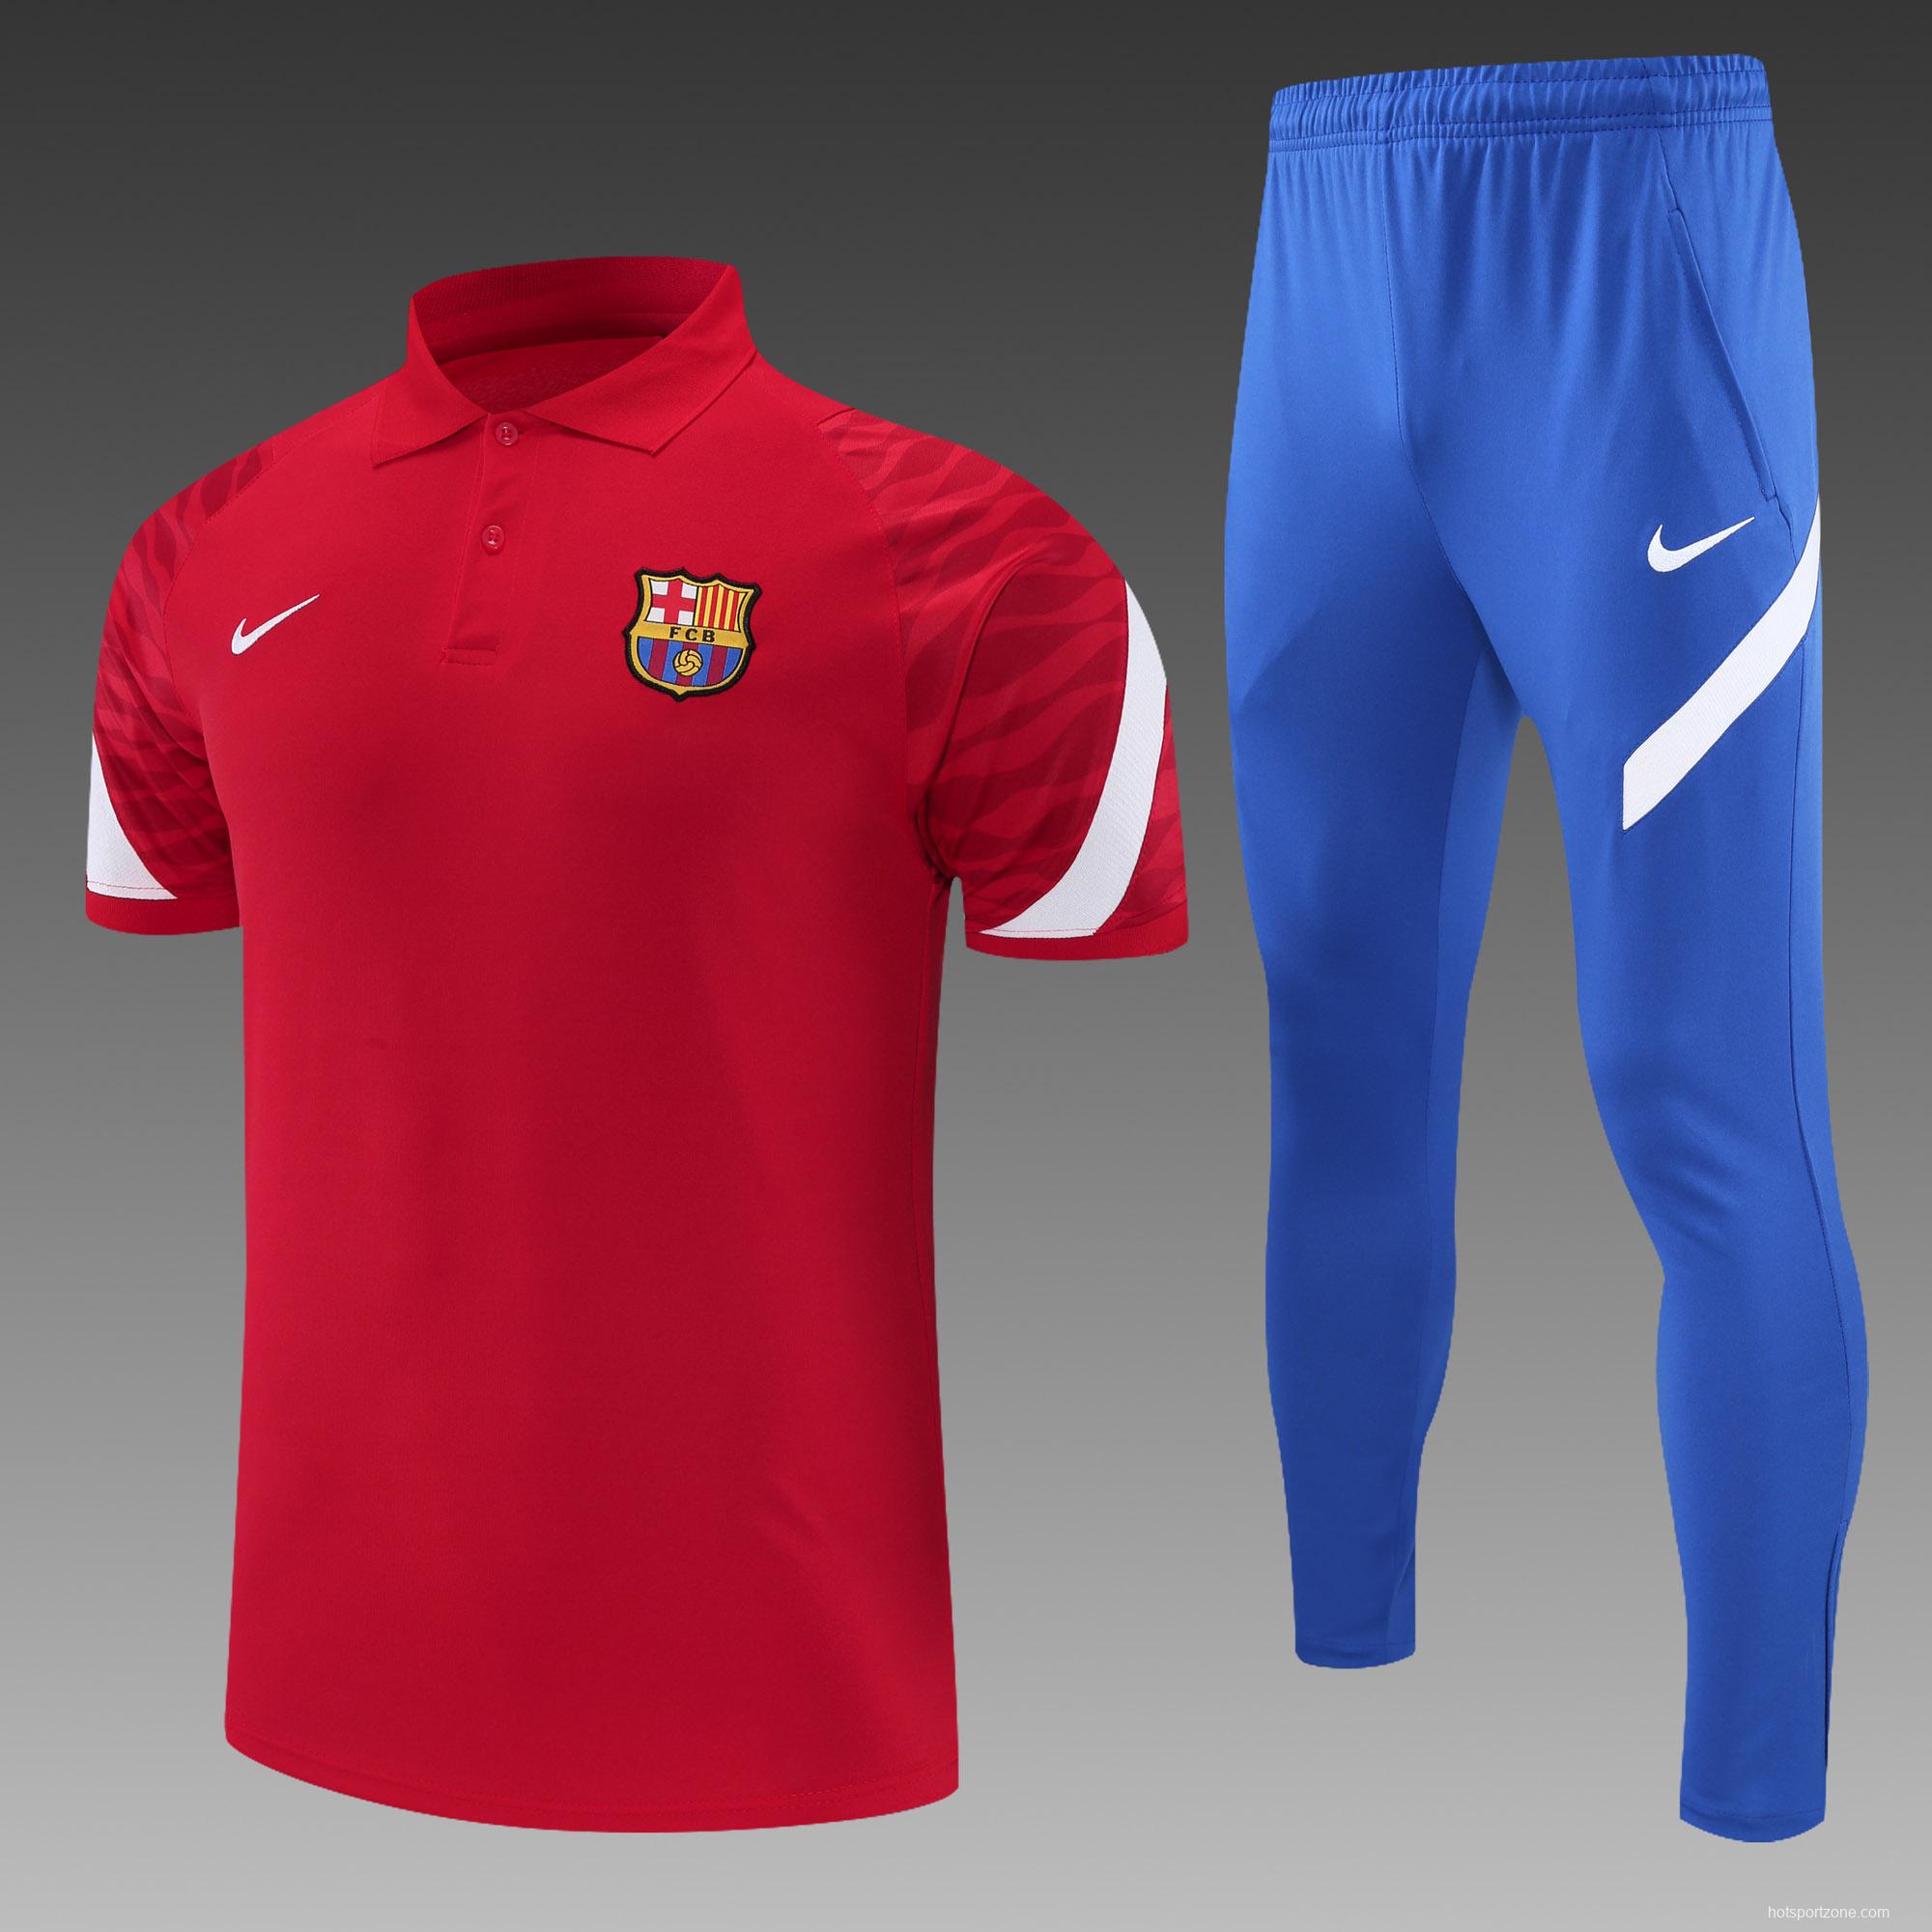 Barcelona POLO kit red blue (not supported to be sold separately)